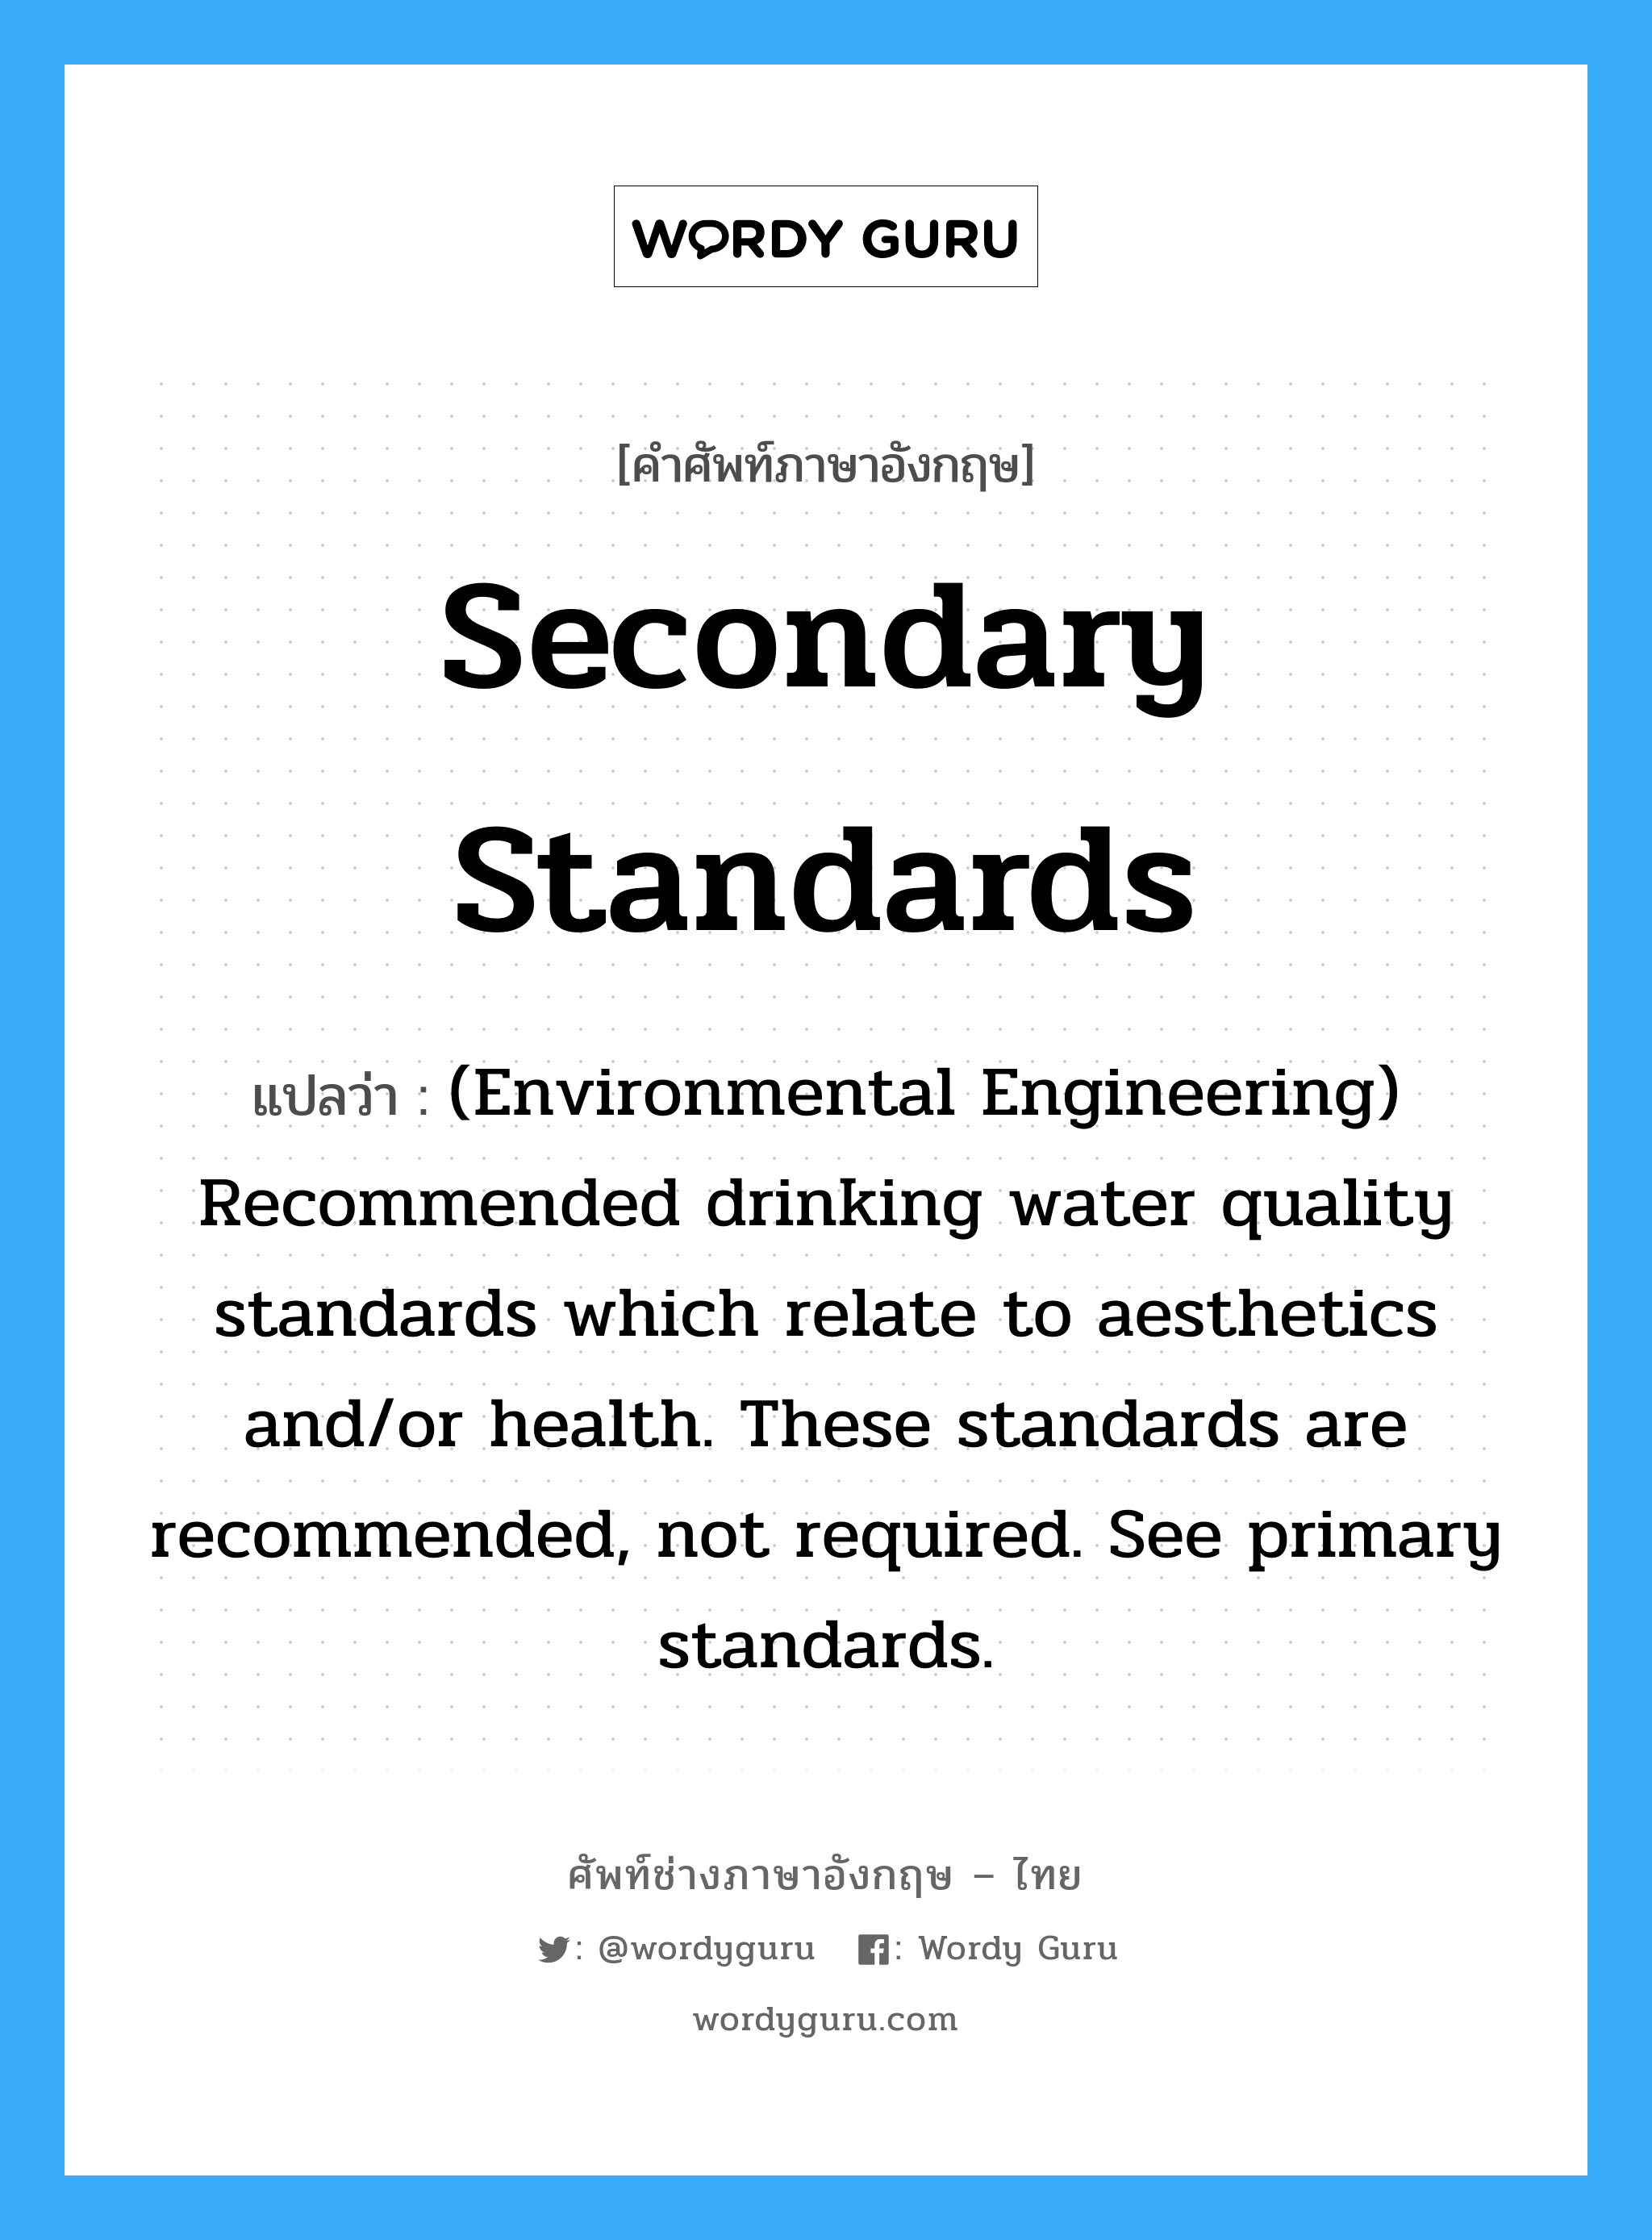 (Environmental Engineering) Recommended drinking water quality standards which relate to aesthetics and/or health. These standards are recommended, not required. See primary standards. ภาษาอังกฤษ?, คำศัพท์ช่างภาษาอังกฤษ - ไทย (Environmental Engineering) Recommended drinking water quality standards which relate to aesthetics and/or health. These standards are recommended, not required. See primary standards. คำศัพท์ภาษาอังกฤษ (Environmental Engineering) Recommended drinking water quality standards which relate to aesthetics and/or health. These standards are recommended, not required. See primary standards. แปลว่า Secondary standards